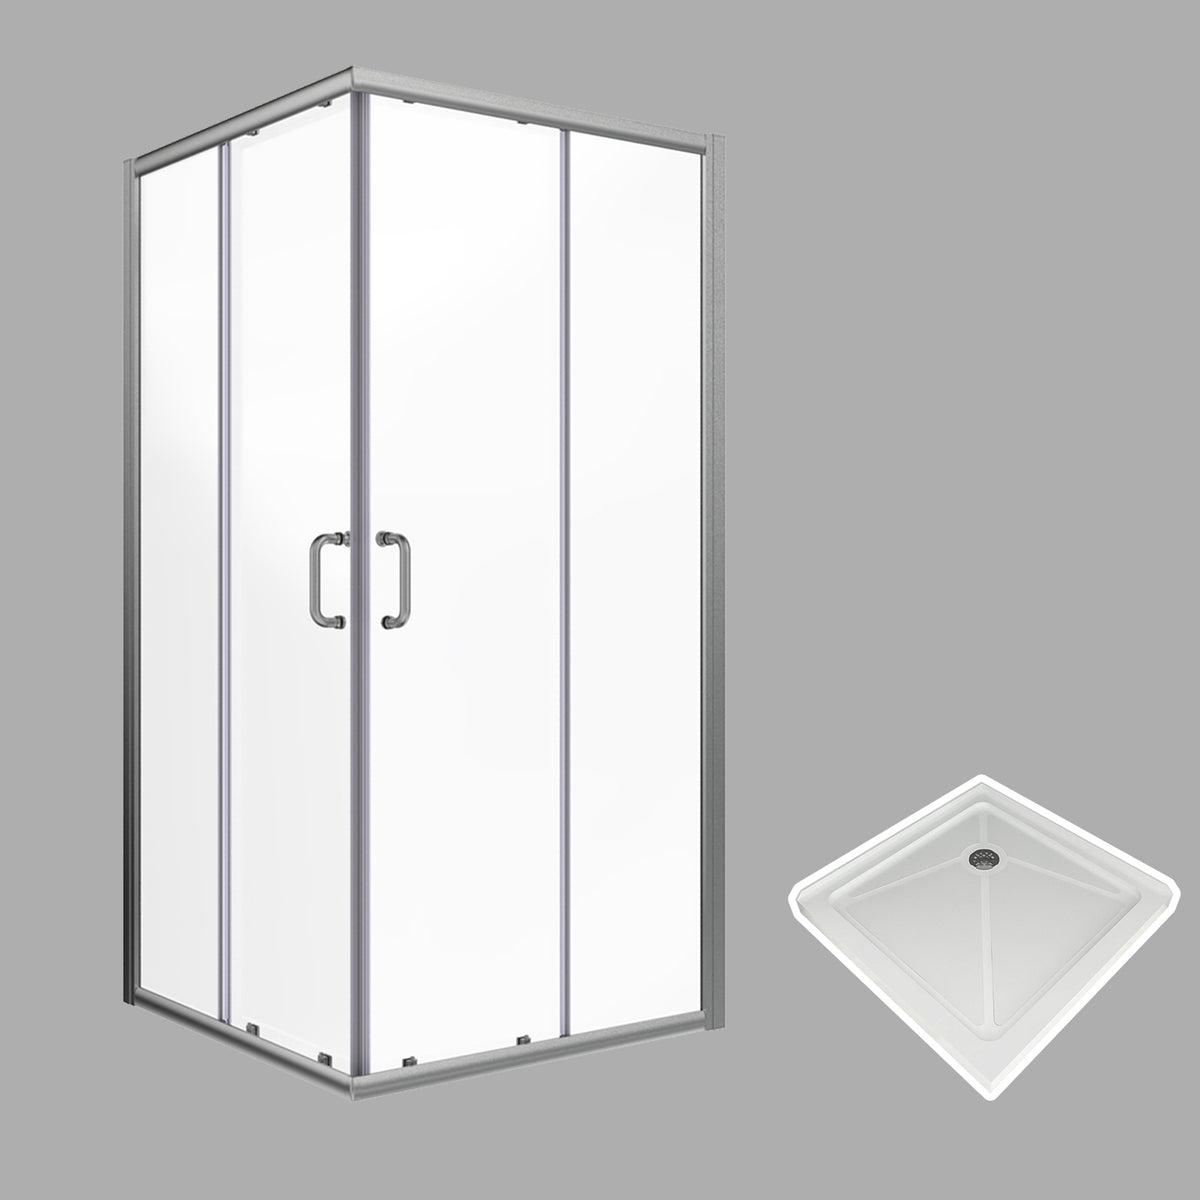 SUNNY SHOWER 36 in. W x 36 in. D x 72 in. H Brushed Nickel Corner Entry Enclosure With Sliding Doors And White Square Base